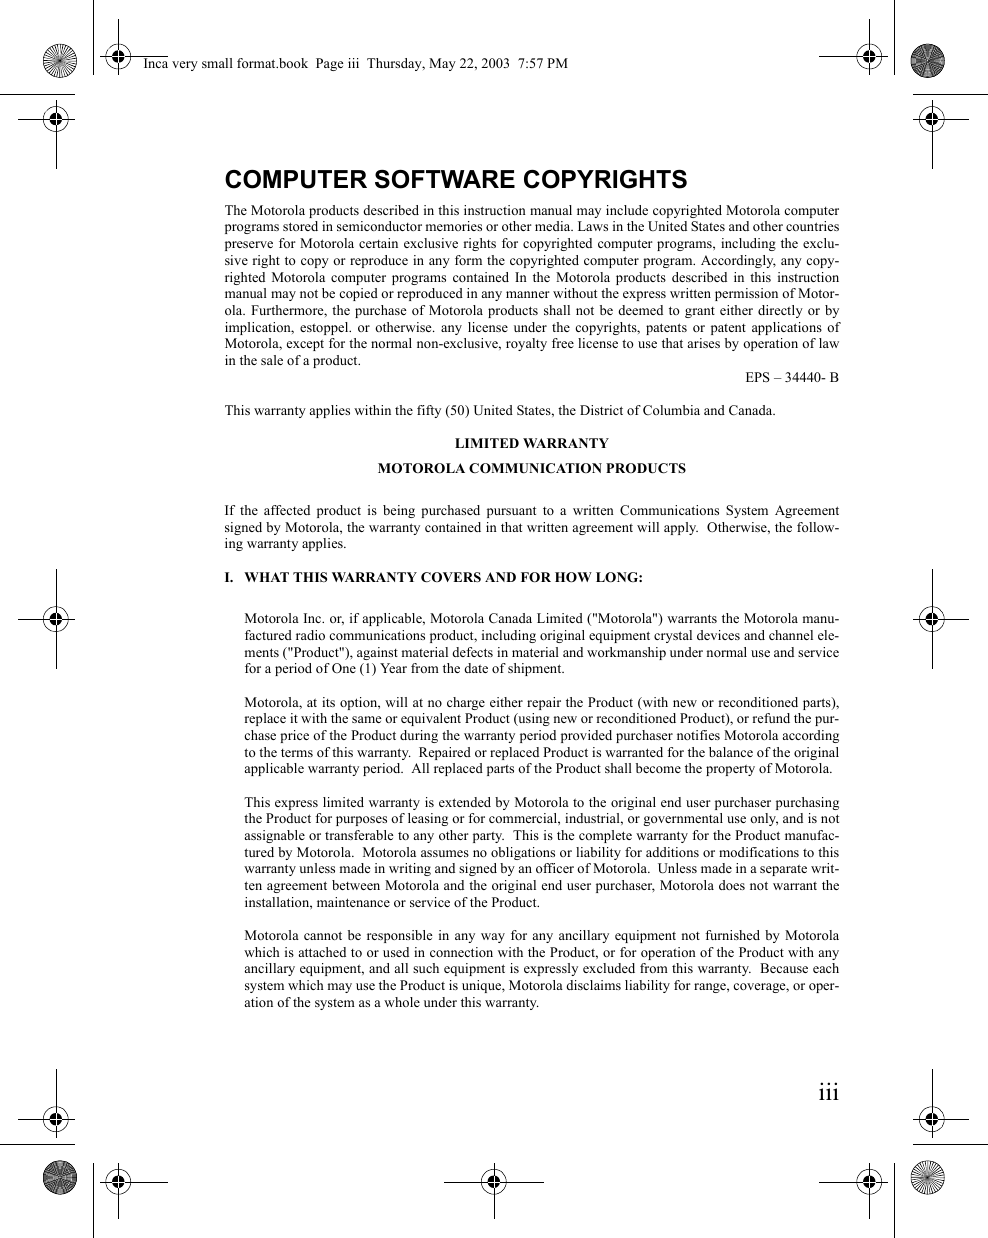 iiiCOMPUTER SOFTWARE COPYRIGHTSThe Motorola products described in this instruction manual may include copyrighted Motorola computerprograms stored in semiconductor memories or other media. Laws in the United States and other countriespreserve for Motorola certain exclusive rights for copyrighted computer programs, including the exclu-sive right to copy or reproduce in any form the copyrighted computer program. Accordingly, any copy-righted Motorola computer programs contained In the Motorola products described in this instructionmanual may not be copied or reproduced in any manner without the express written permission of Motor-ola. Furthermore, the purchase of Motorola products shall not be deemed to grant either directly or byimplication, estoppel. or otherwise. any license under the copyrights, patents or patent applications ofMotorola, except for the normal non-exclusive, royalty free license to use that arises by operation of lawin the sale of a product.EPS – 34440- BThis warranty applies within the fifty (50) United States, the District of Columbia and Canada.LIMITED WARRANTYMOTOROLA COMMUNICATION PRODUCTSIf the affected product is being purchased pursuant to a written Communications System Agreementsigned by Motorola, the warranty contained in that written agreement will apply.  Otherwise, the follow-ing warranty applies.I. WHAT THIS WARRANTY COVERS AND FOR HOW LONG:Motorola Inc. or, if applicable, Motorola Canada Limited (&quot;Motorola&quot;) warrants the Motorola manu-factured radio communications product, including original equipment crystal devices and channel ele-ments (&quot;Product&quot;), against material defects in material and workmanship under normal use and servicefor a period of One (1) Year from the date of shipment.Motorola, at its option, will at no charge either repair the Product (with new or reconditioned parts),replace it with the same or equivalent Product (using new or reconditioned Product), or refund the pur-chase price of the Product during the warranty period provided purchaser notifies Motorola accordingto the terms of this warranty.  Repaired or replaced Product is warranted for the balance of the originalapplicable warranty period.  All replaced parts of the Product shall become the property of Motorola.This express limited warranty is extended by Motorola to the original end user purchaser purchasingthe Product for purposes of leasing or for commercial, industrial, or governmental use only, and is notassignable or transferable to any other party.  This is the complete warranty for the Product manufac-tured by Motorola.  Motorola assumes no obligations or liability for additions or modifications to thiswarranty unless made in writing and signed by an officer of Motorola.  Unless made in a separate writ-ten agreement between Motorola and the original end user purchaser, Motorola does not warrant theinstallation, maintenance or service of the Product.Motorola cannot be responsible in any way for any ancillary equipment not furnished by Motorolawhich is attached to or used in connection with the Product, or for operation of the Product with anyancillary equipment, and all such equipment is expressly excluded from this warranty.  Because eachsystem which may use the Product is unique, Motorola disclaims liability for range, coverage, or oper-ation of the system as a whole under this warranty.Inca very small format.book  Page iii  Thursday, May 22, 2003  7:57 PM